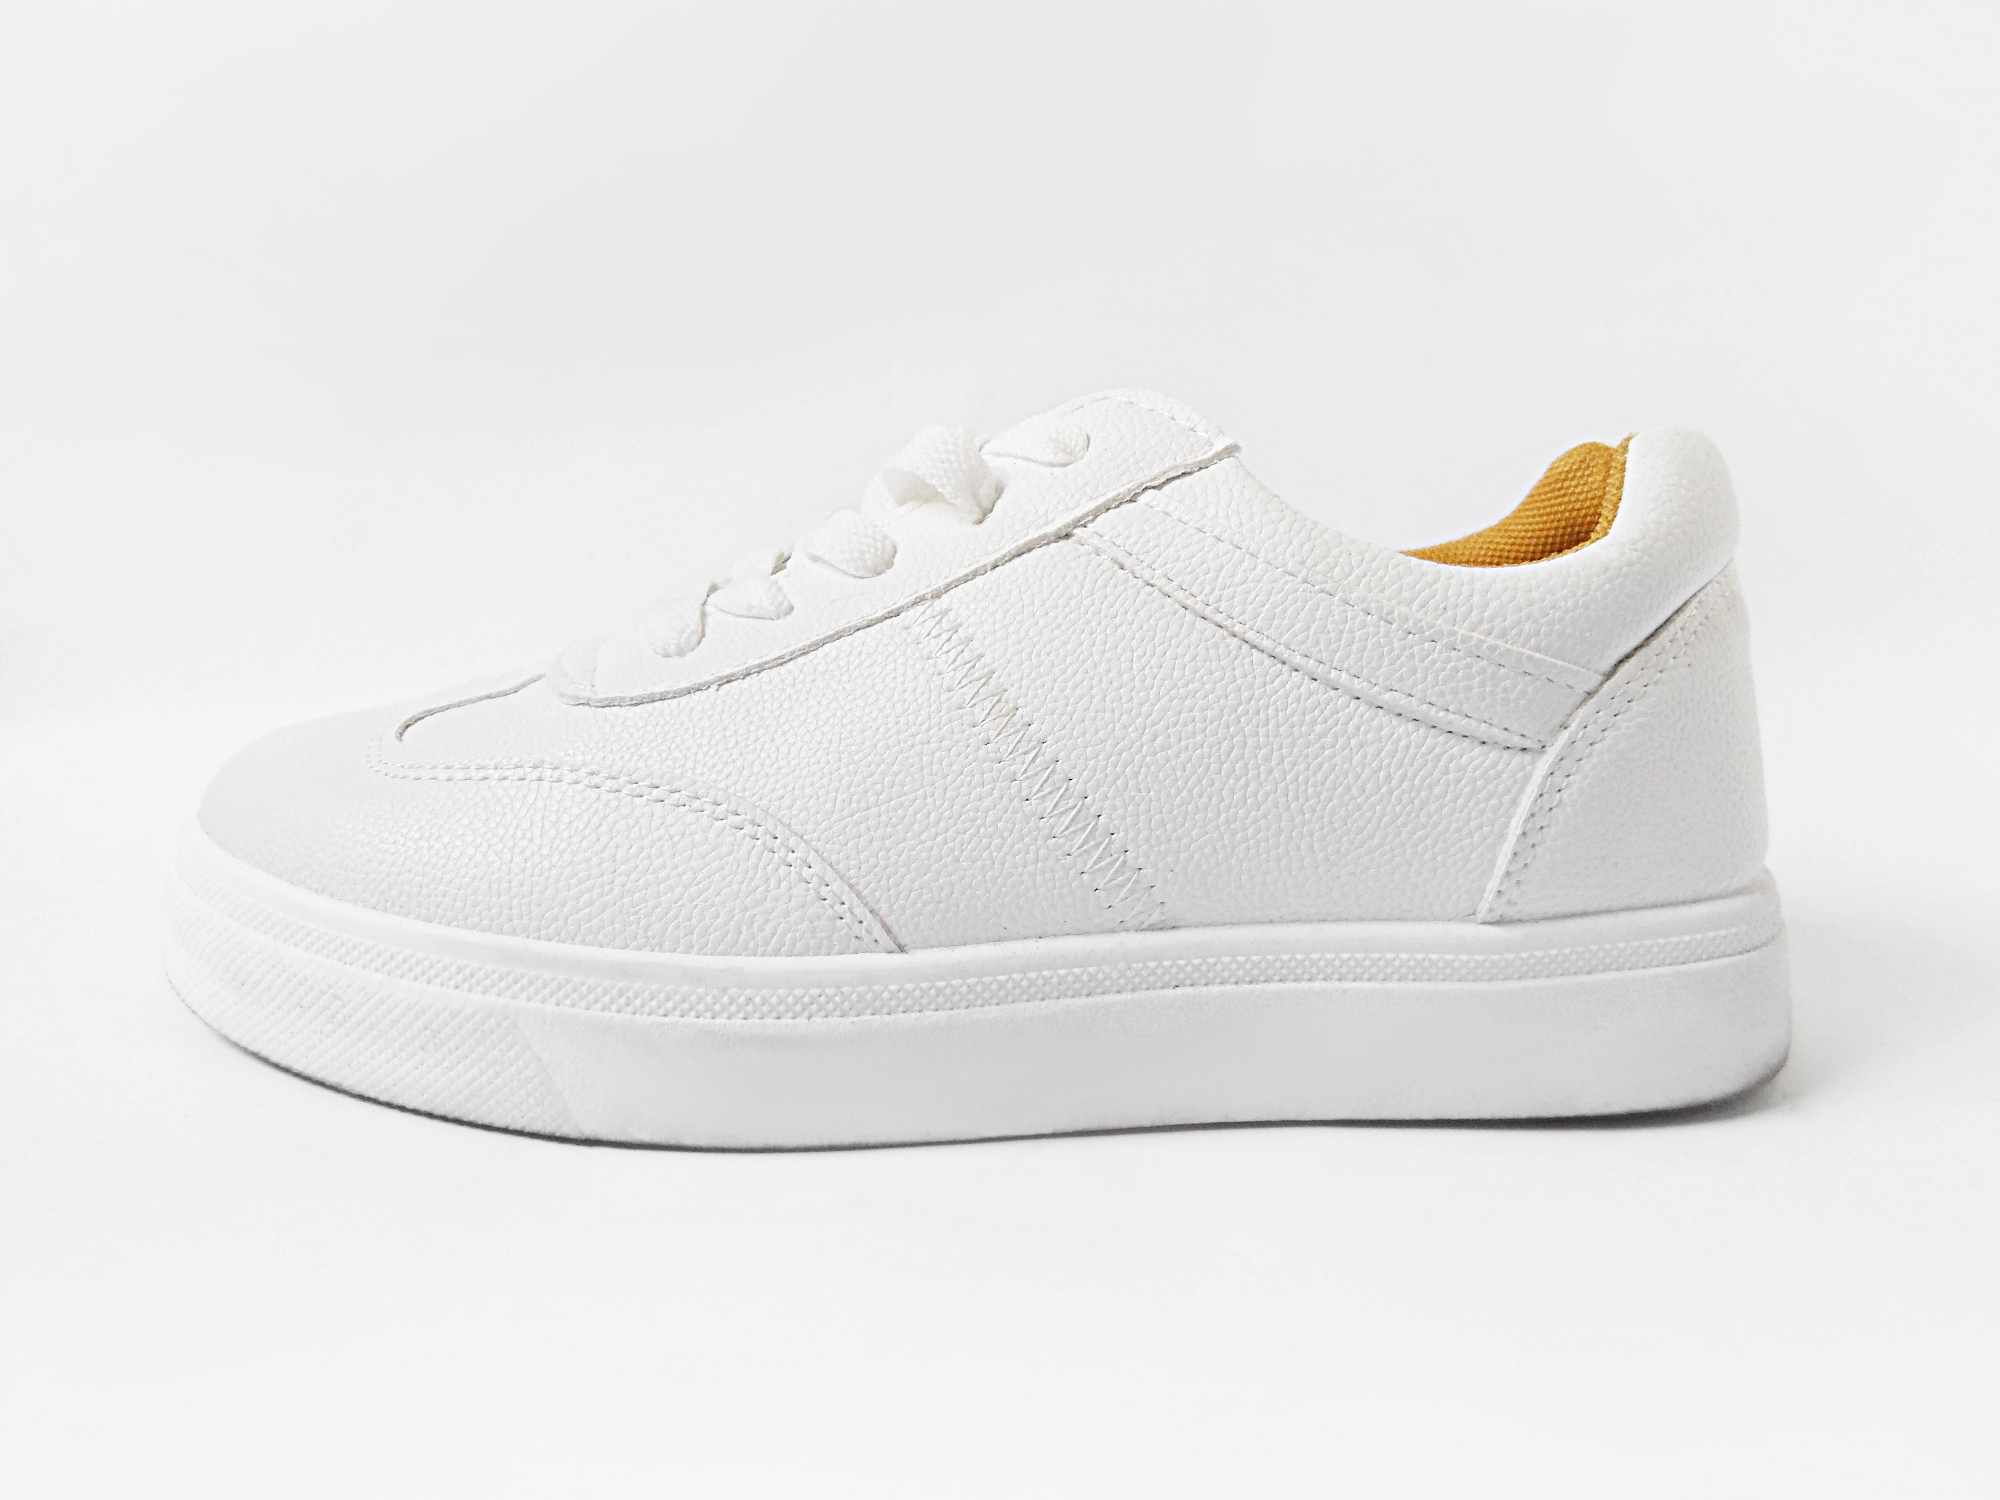 a pair of white basic sneakers in the studio on a plain background